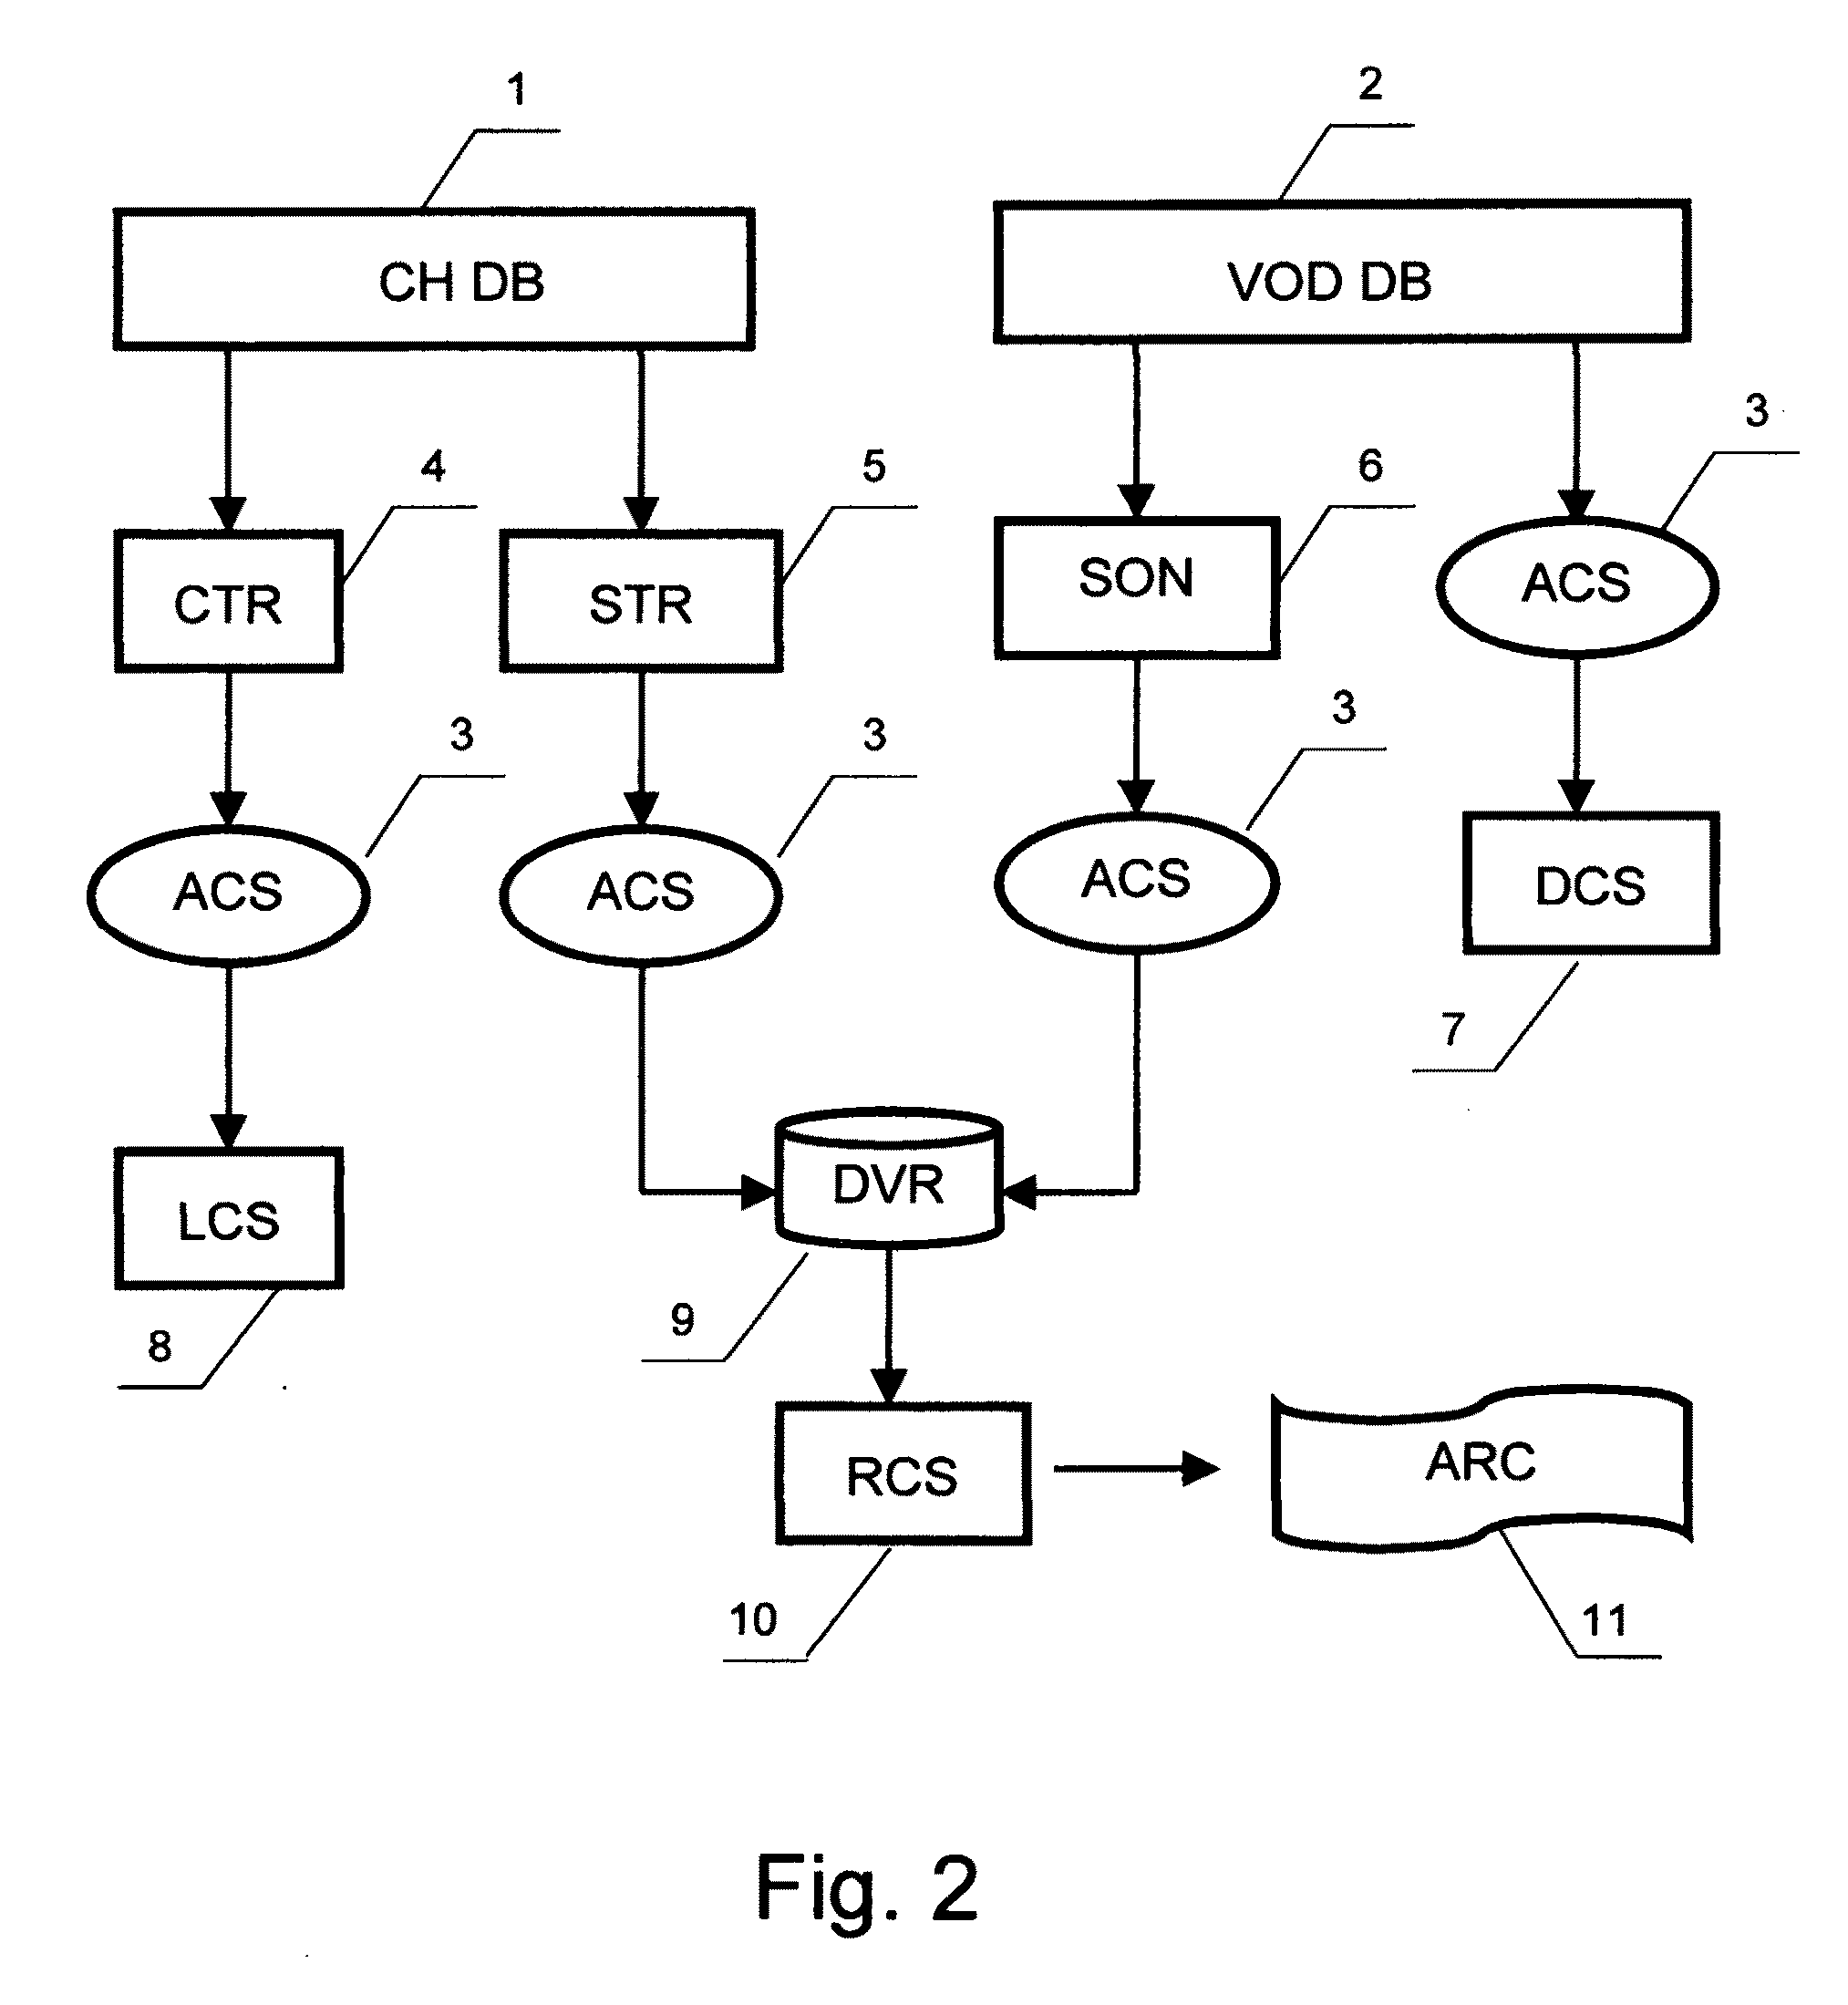 Video content control system with automatic content selection